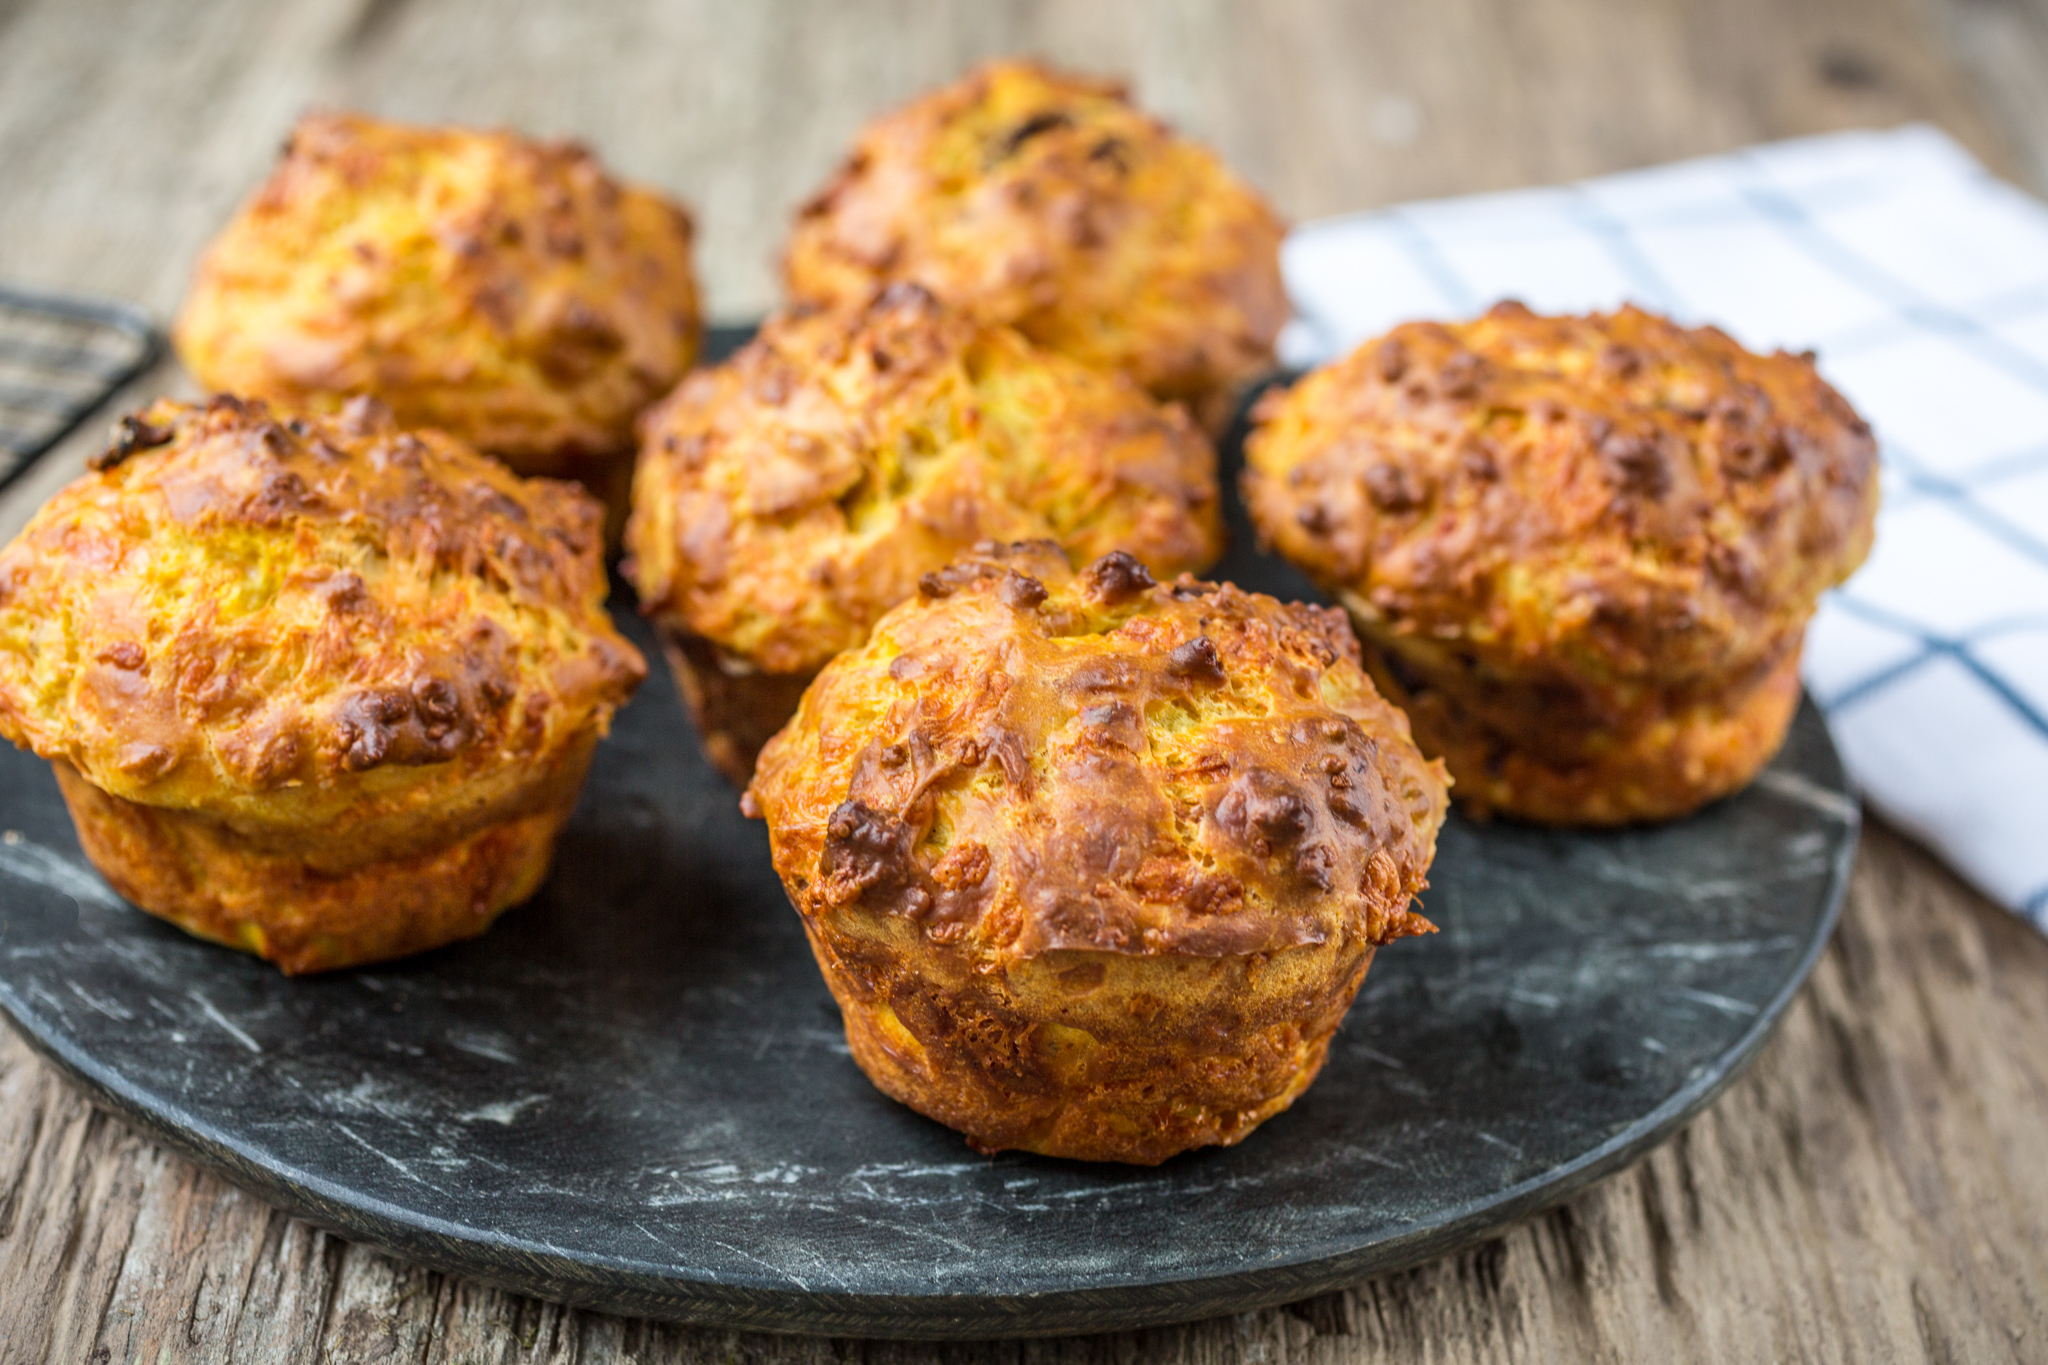 Jon Kempner Food Photographer - Savoury Muffins with Cheddar Cheese and Sun Dried Tomatoes